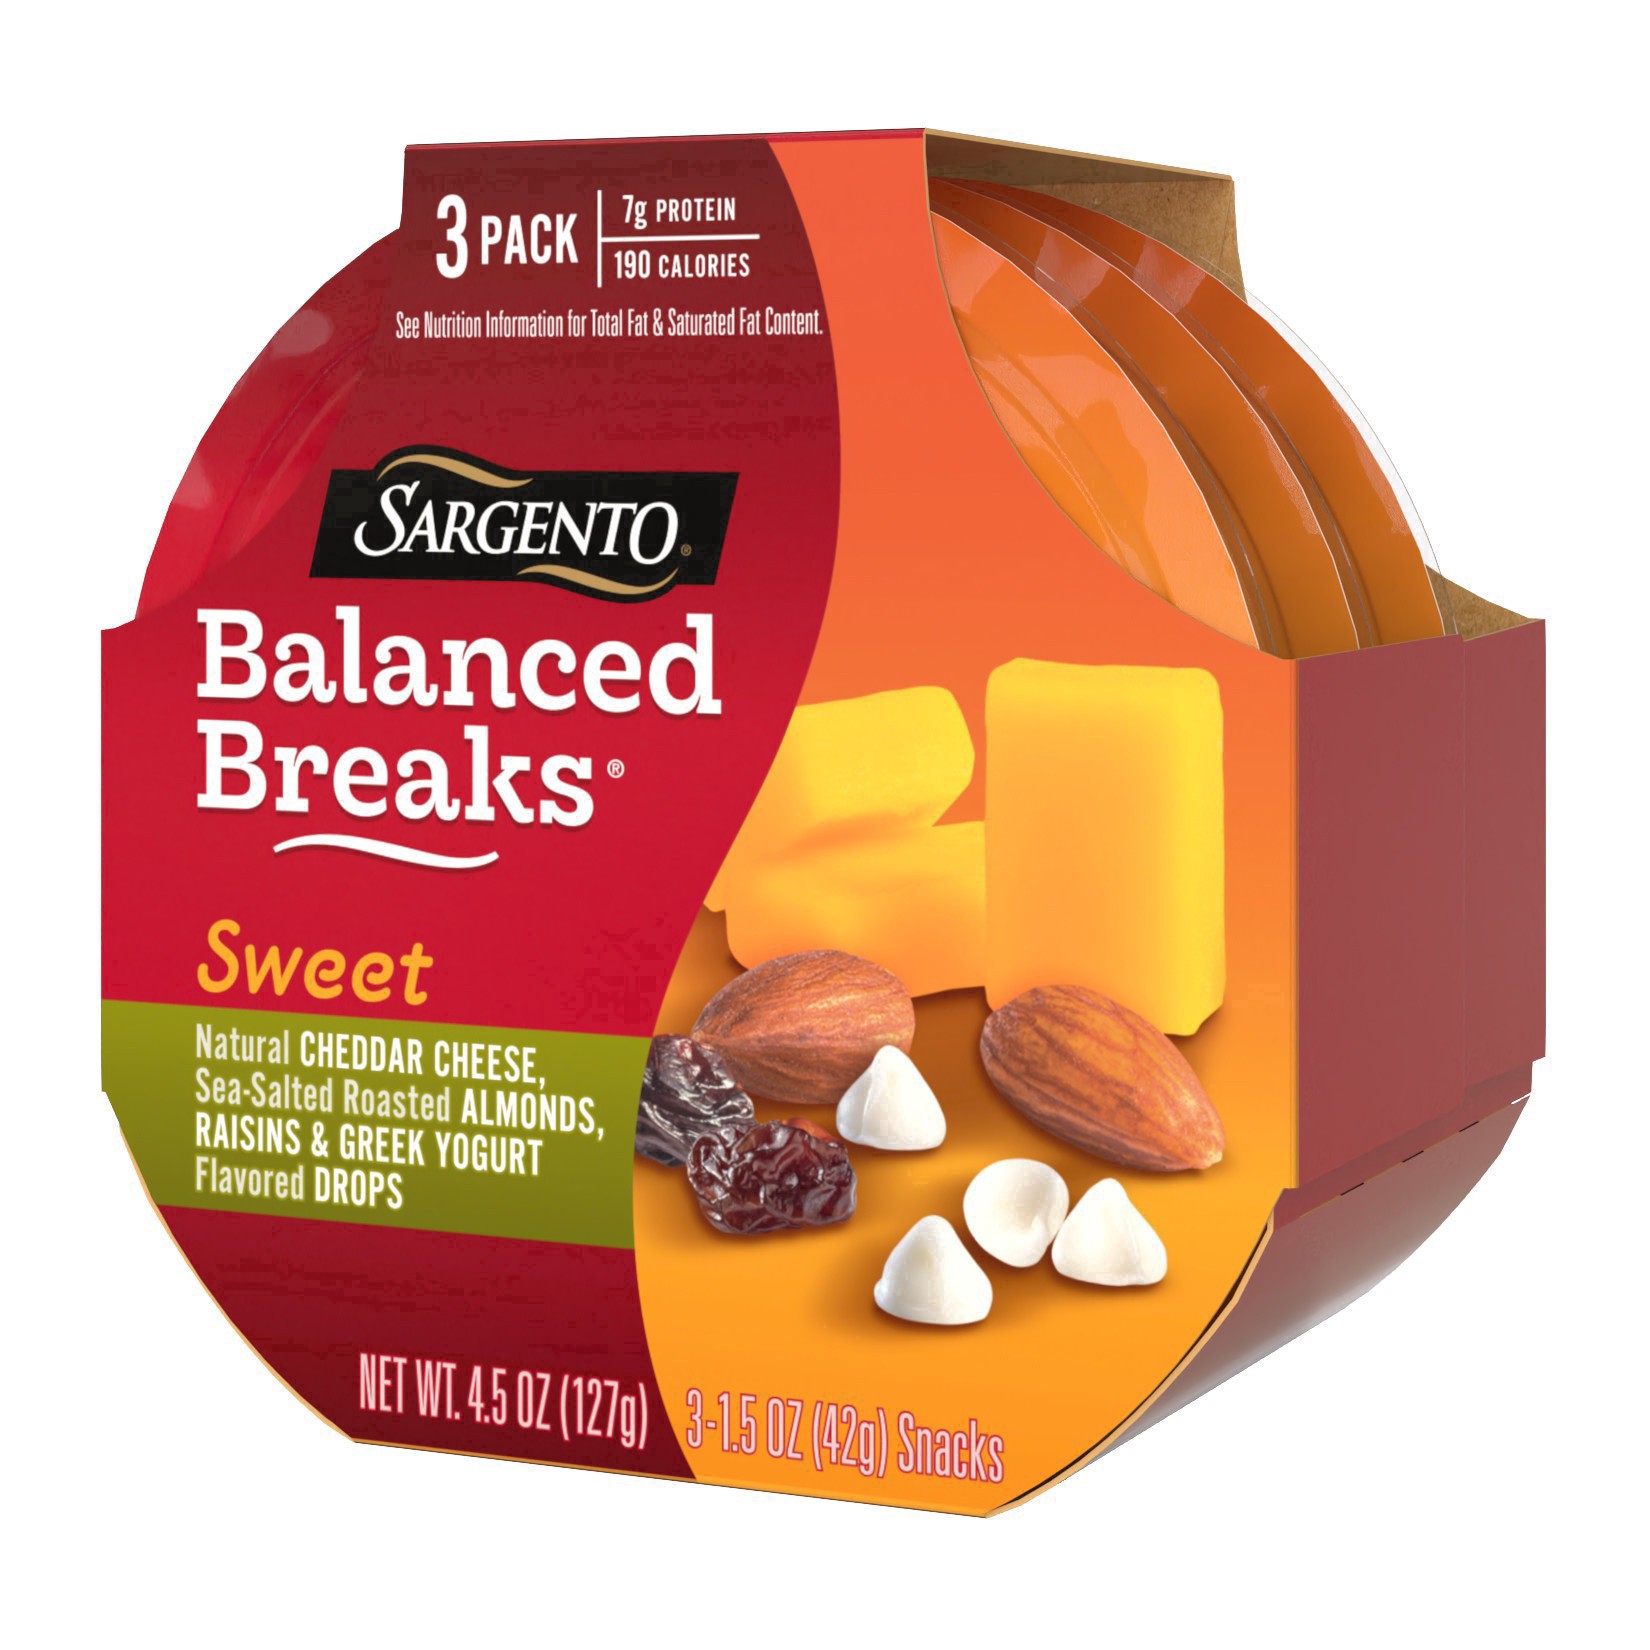 slide 27 of 30, Sargento Sweet Balanced Breaks with Natural Cheddar Cheese, Sea-Salted Roasted Almonds, Raisins and Greek Yogurt Flavored Drops, 1.5 oz., 3-Pack, 3 ct